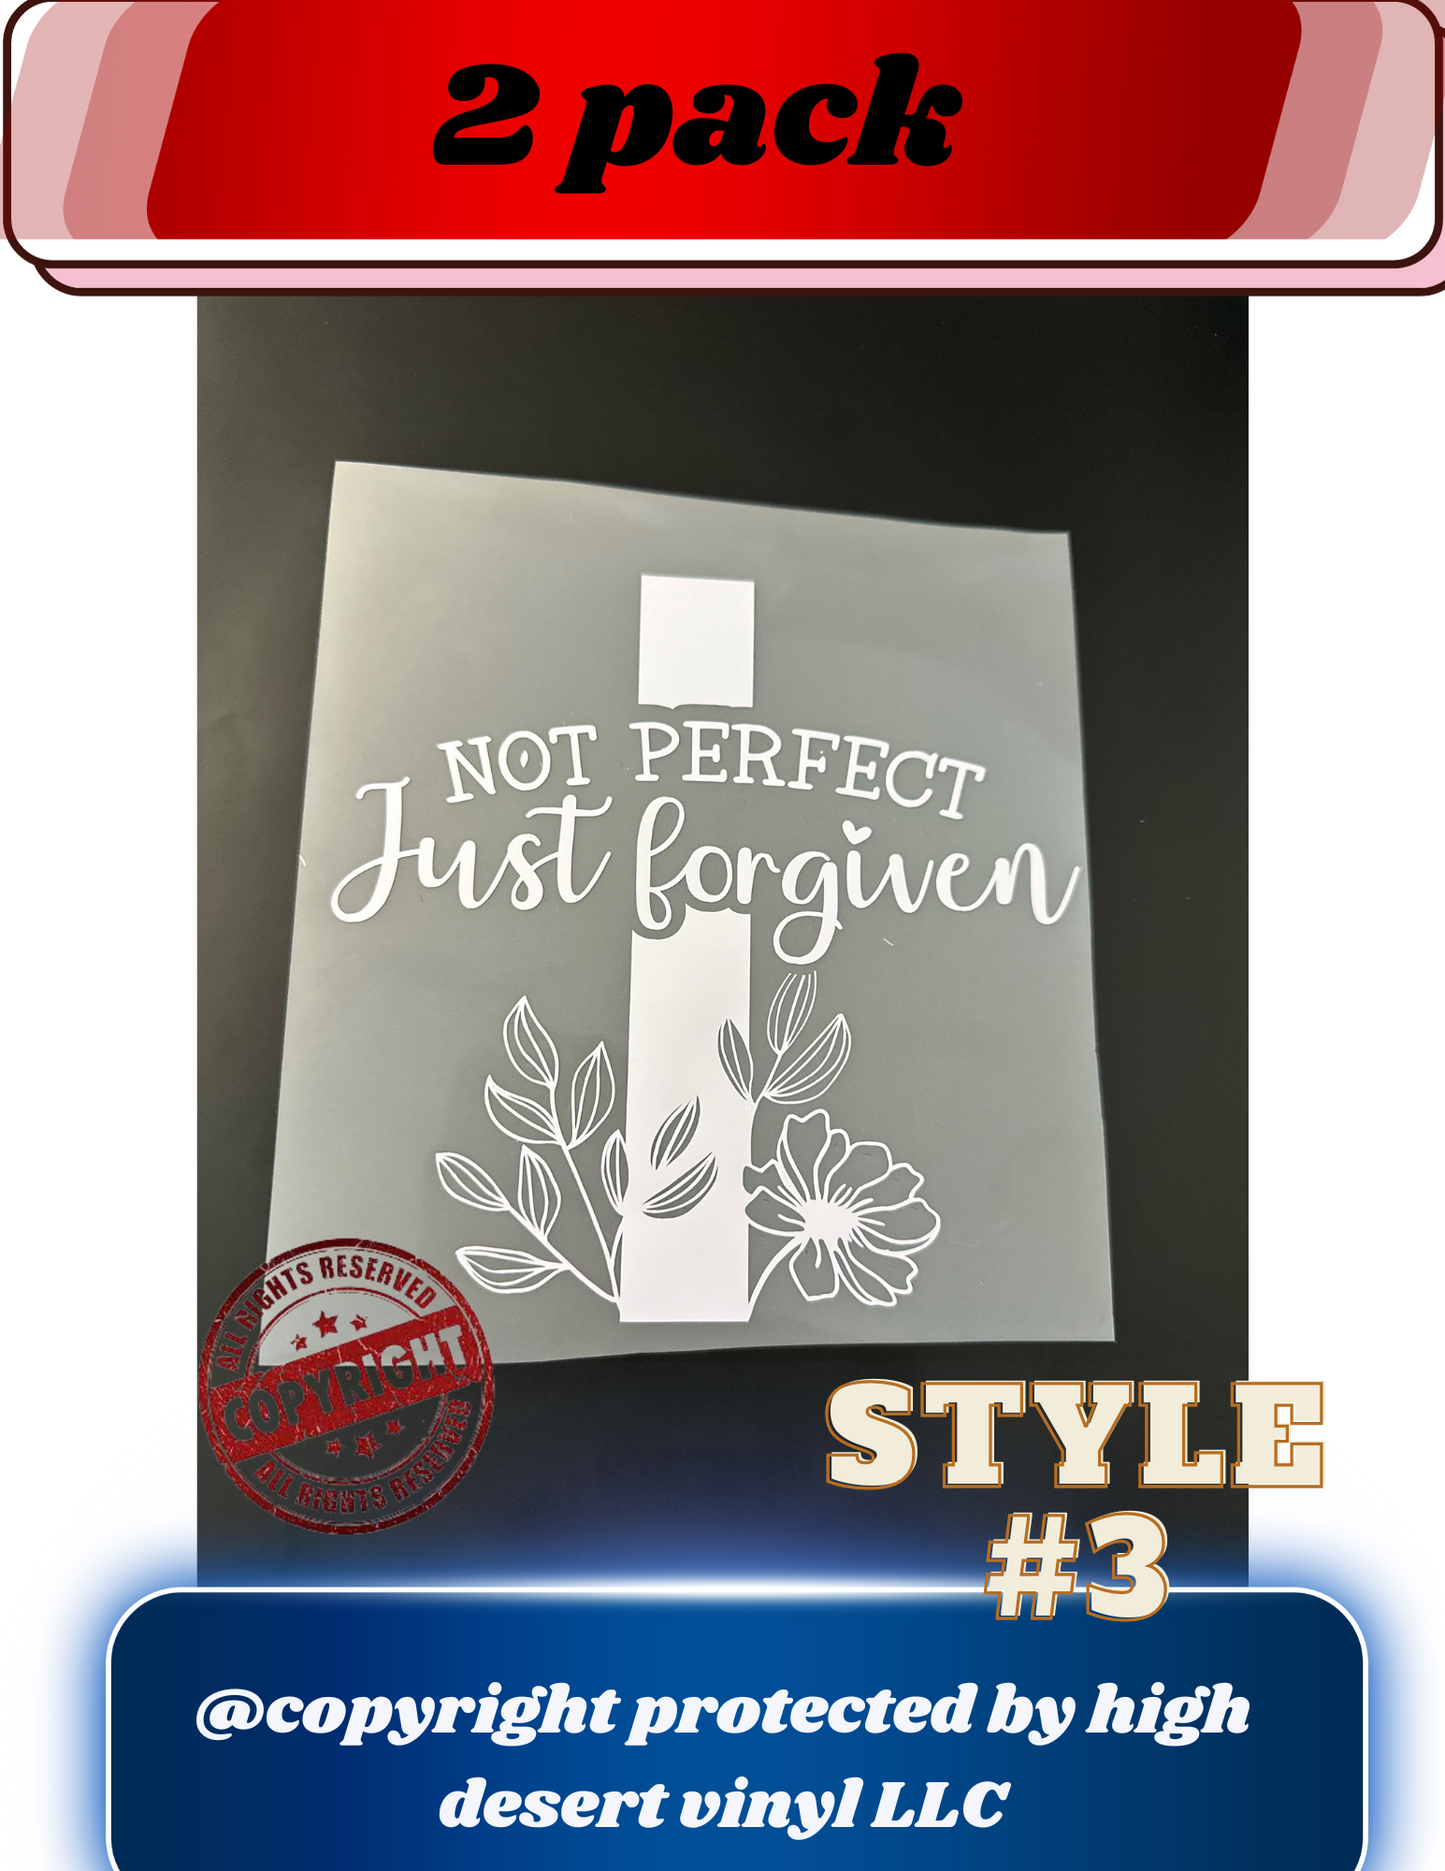 Not perfect just forgiven car decal